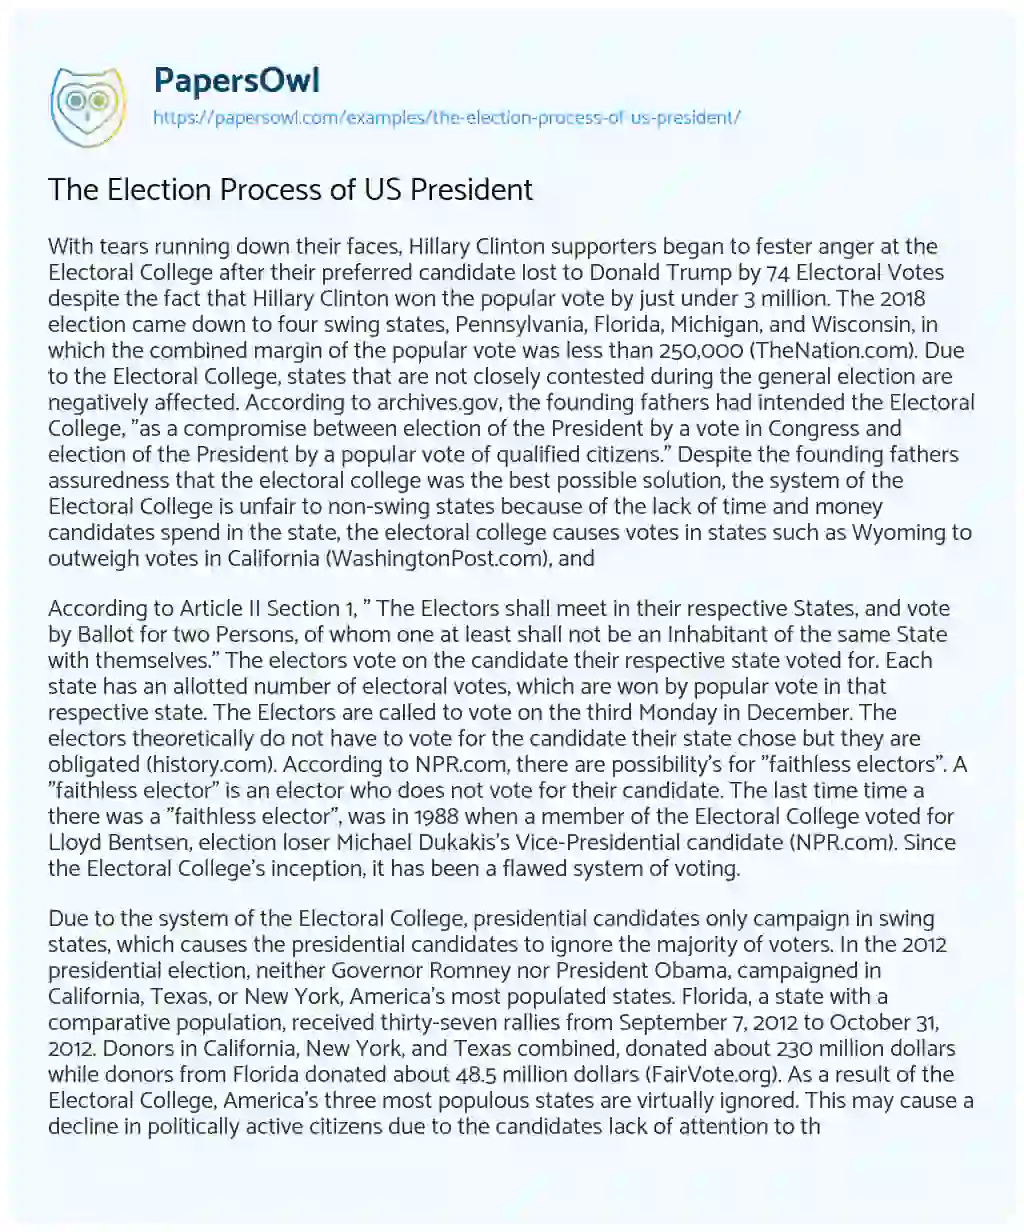 Essay on The Election Process of US President